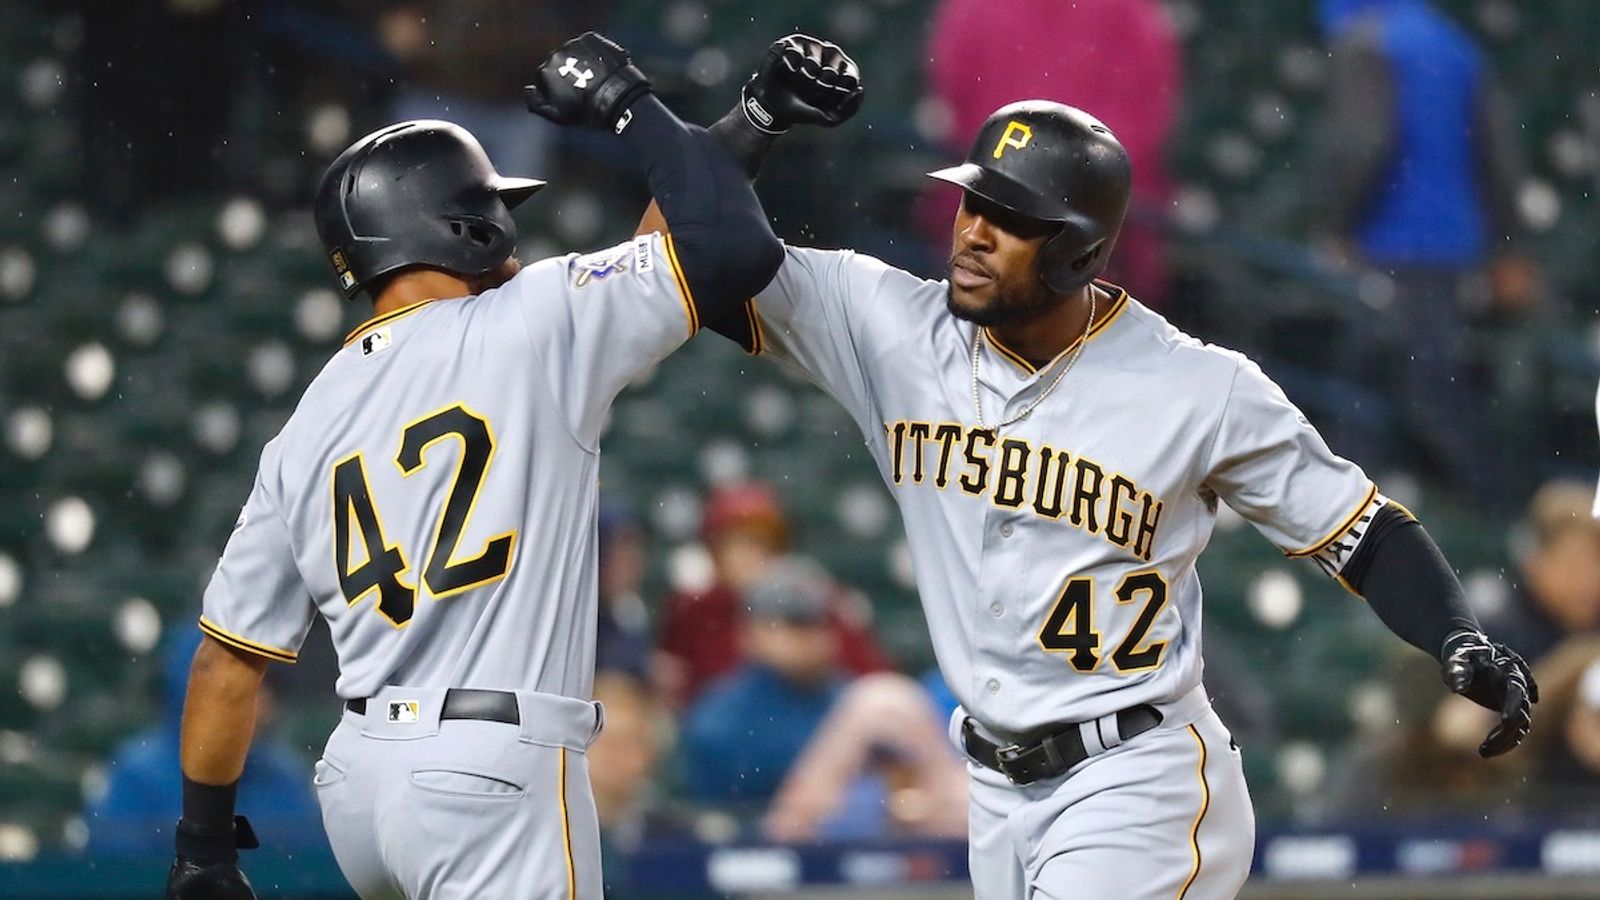 Starling Marte says he's having the best season of his career